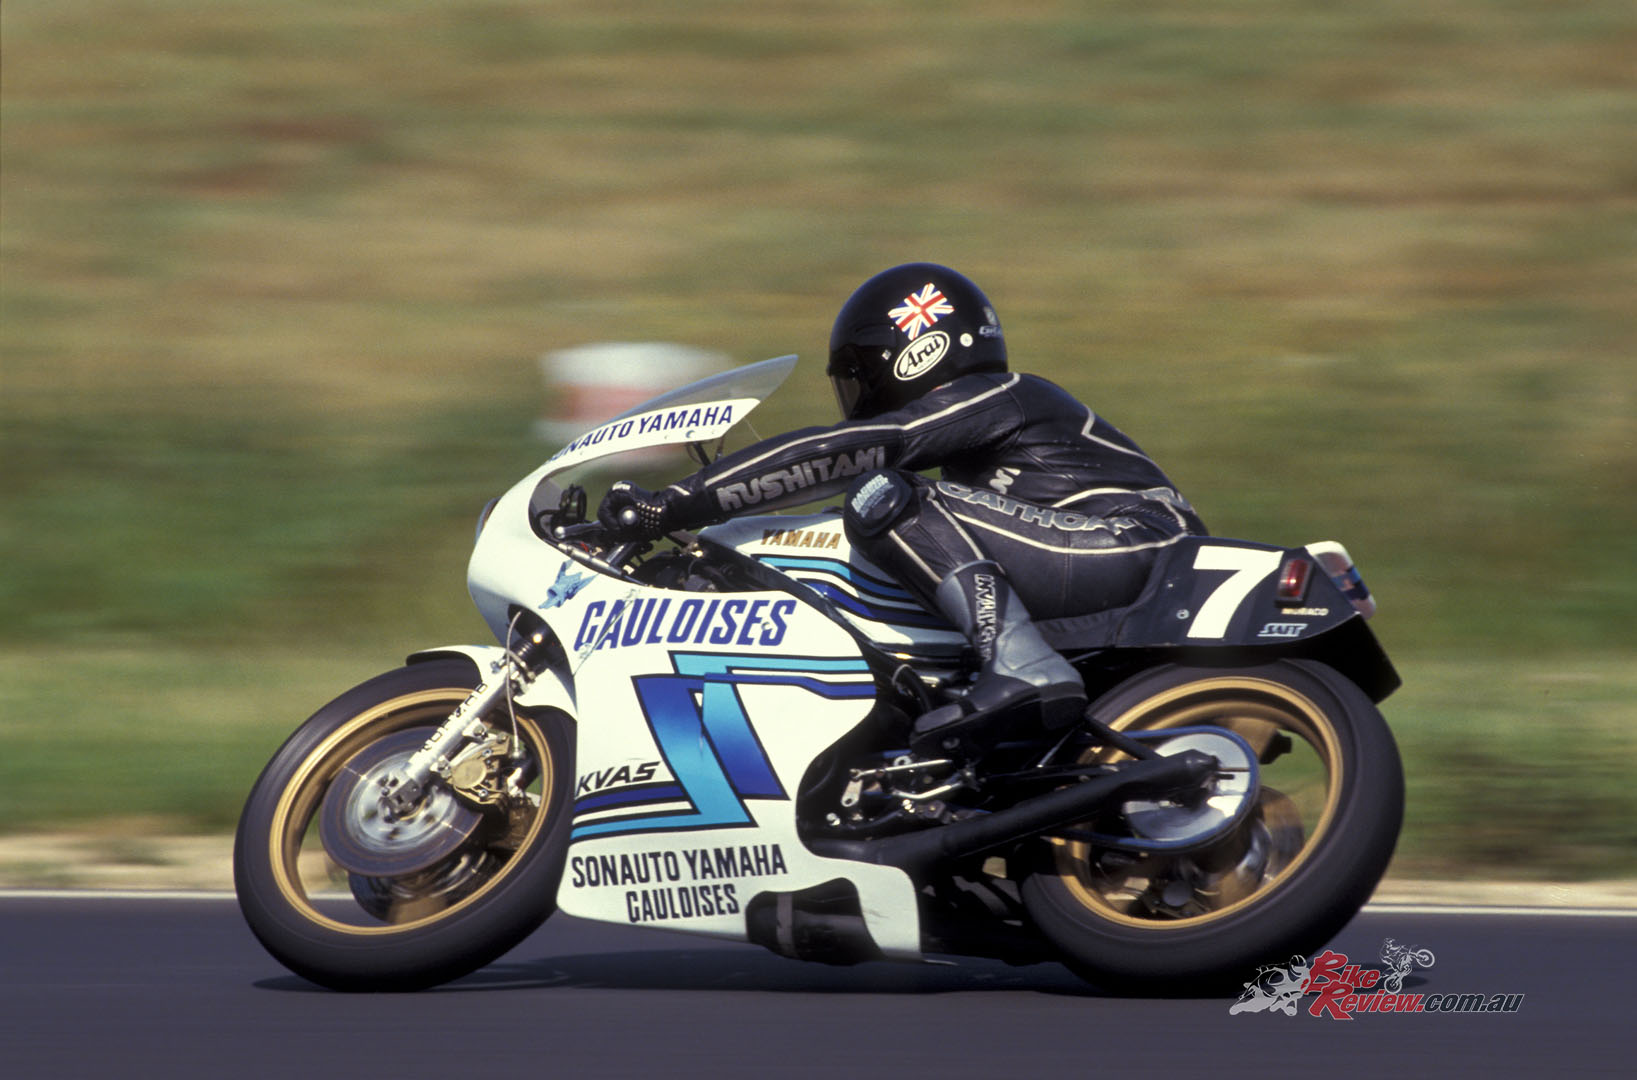 "Compared to a modern road racer or almost any sporting street bike, the rear ride height of the Yamaha was very low, with limited suspension travel and a hard, unprogressive response."